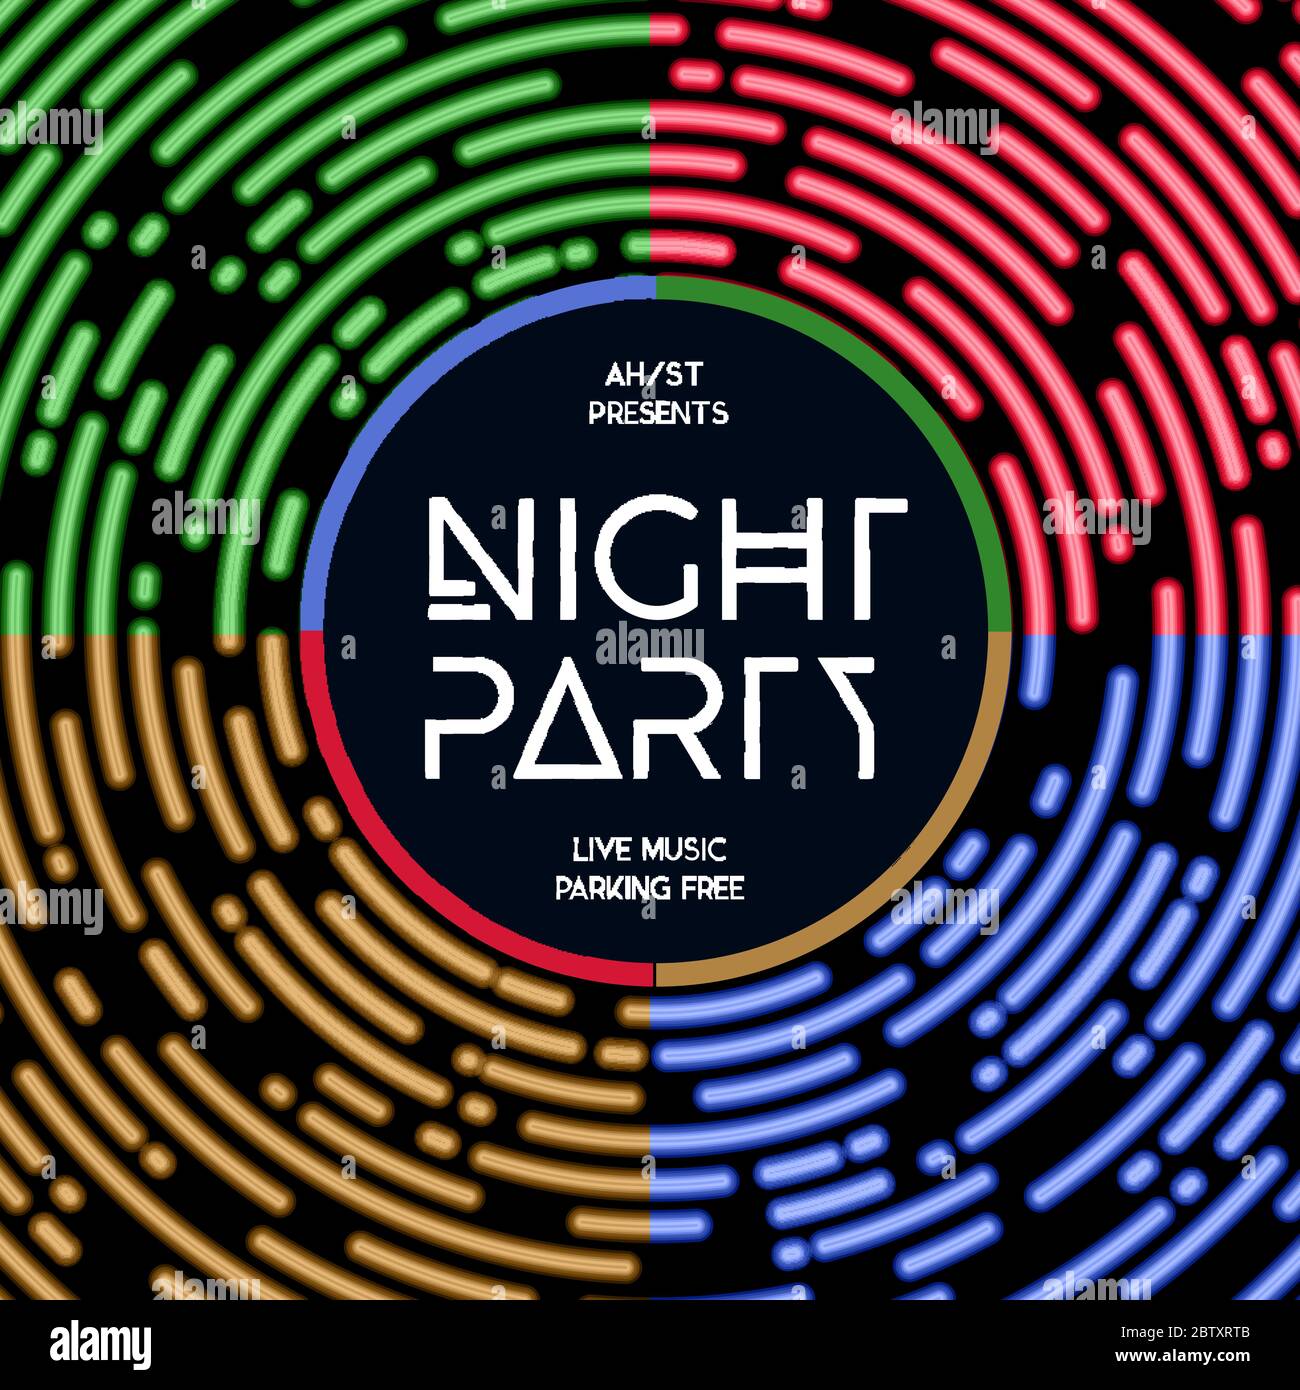 Night party vector illustration. Rounded lines design style. Stock Vector